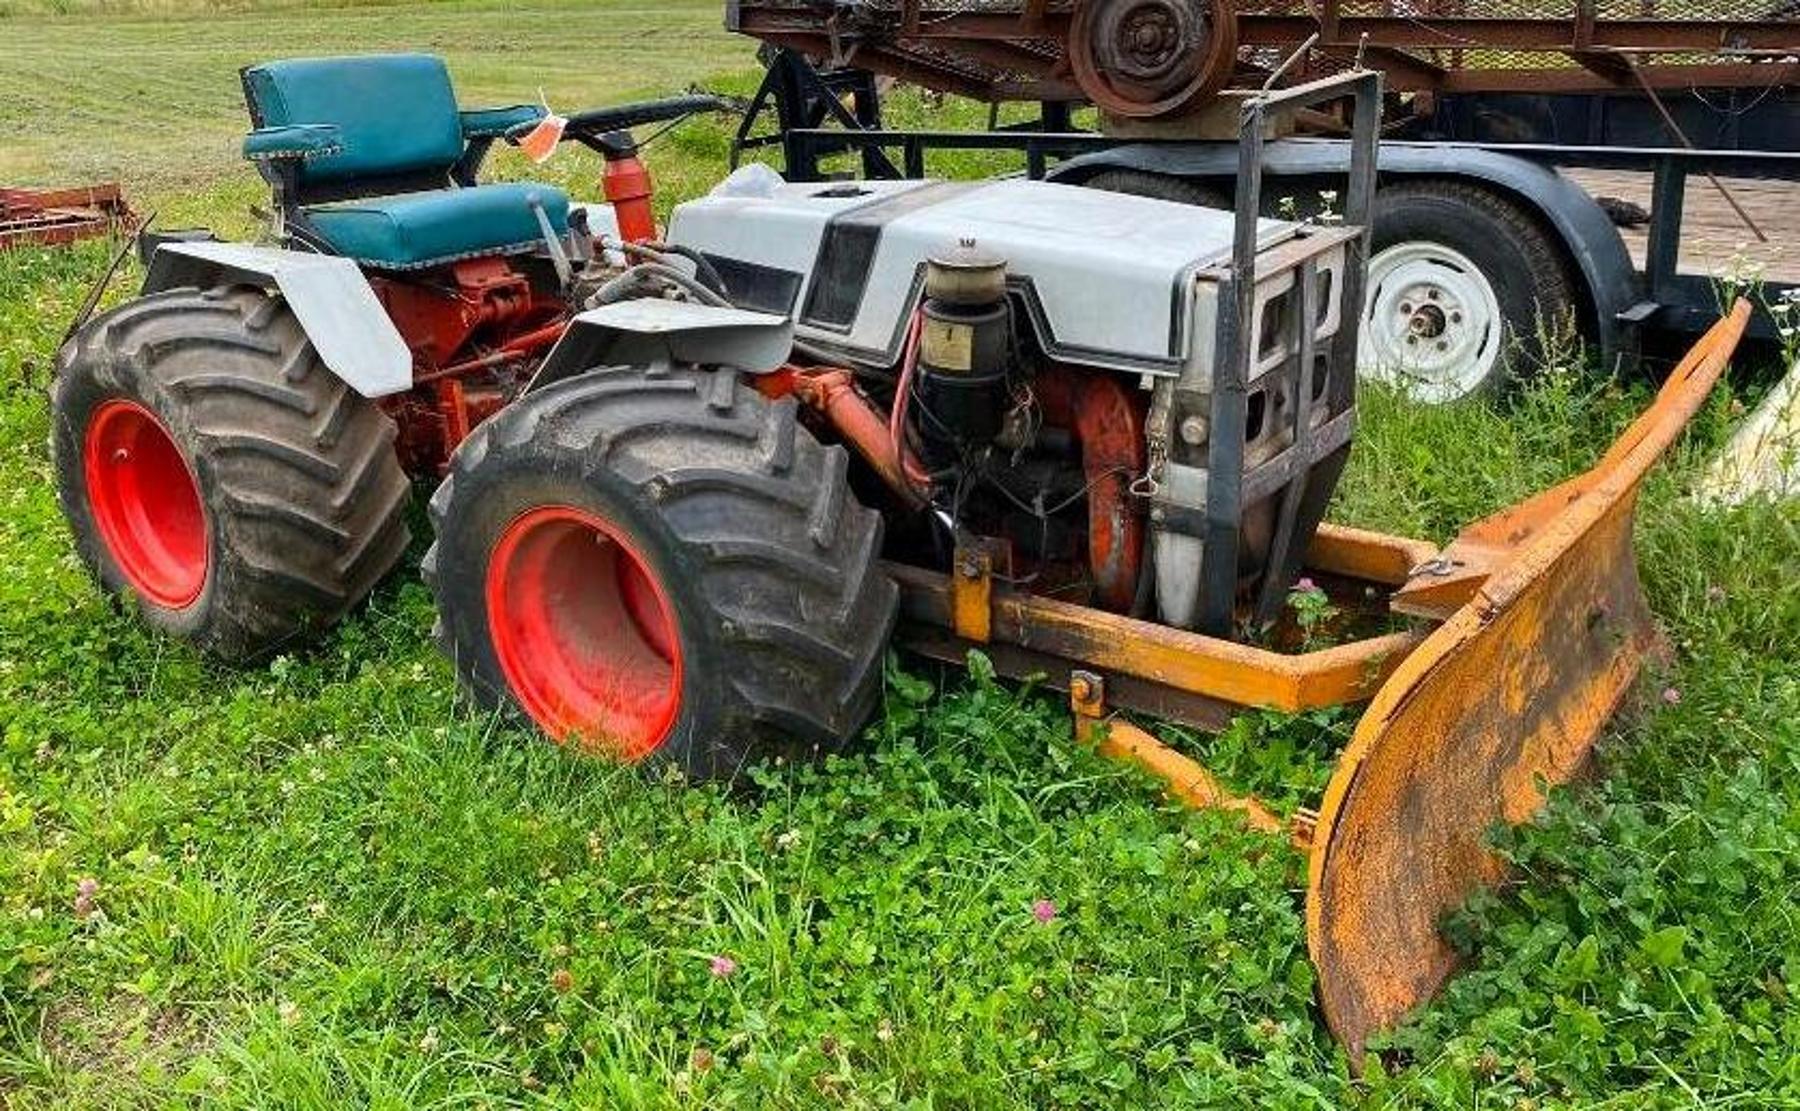 Moving Sale: Farm Machinery, Harley Davidson, Skid Loaders, Construction Tools, Hunting Gear, and Household Items Phase 1